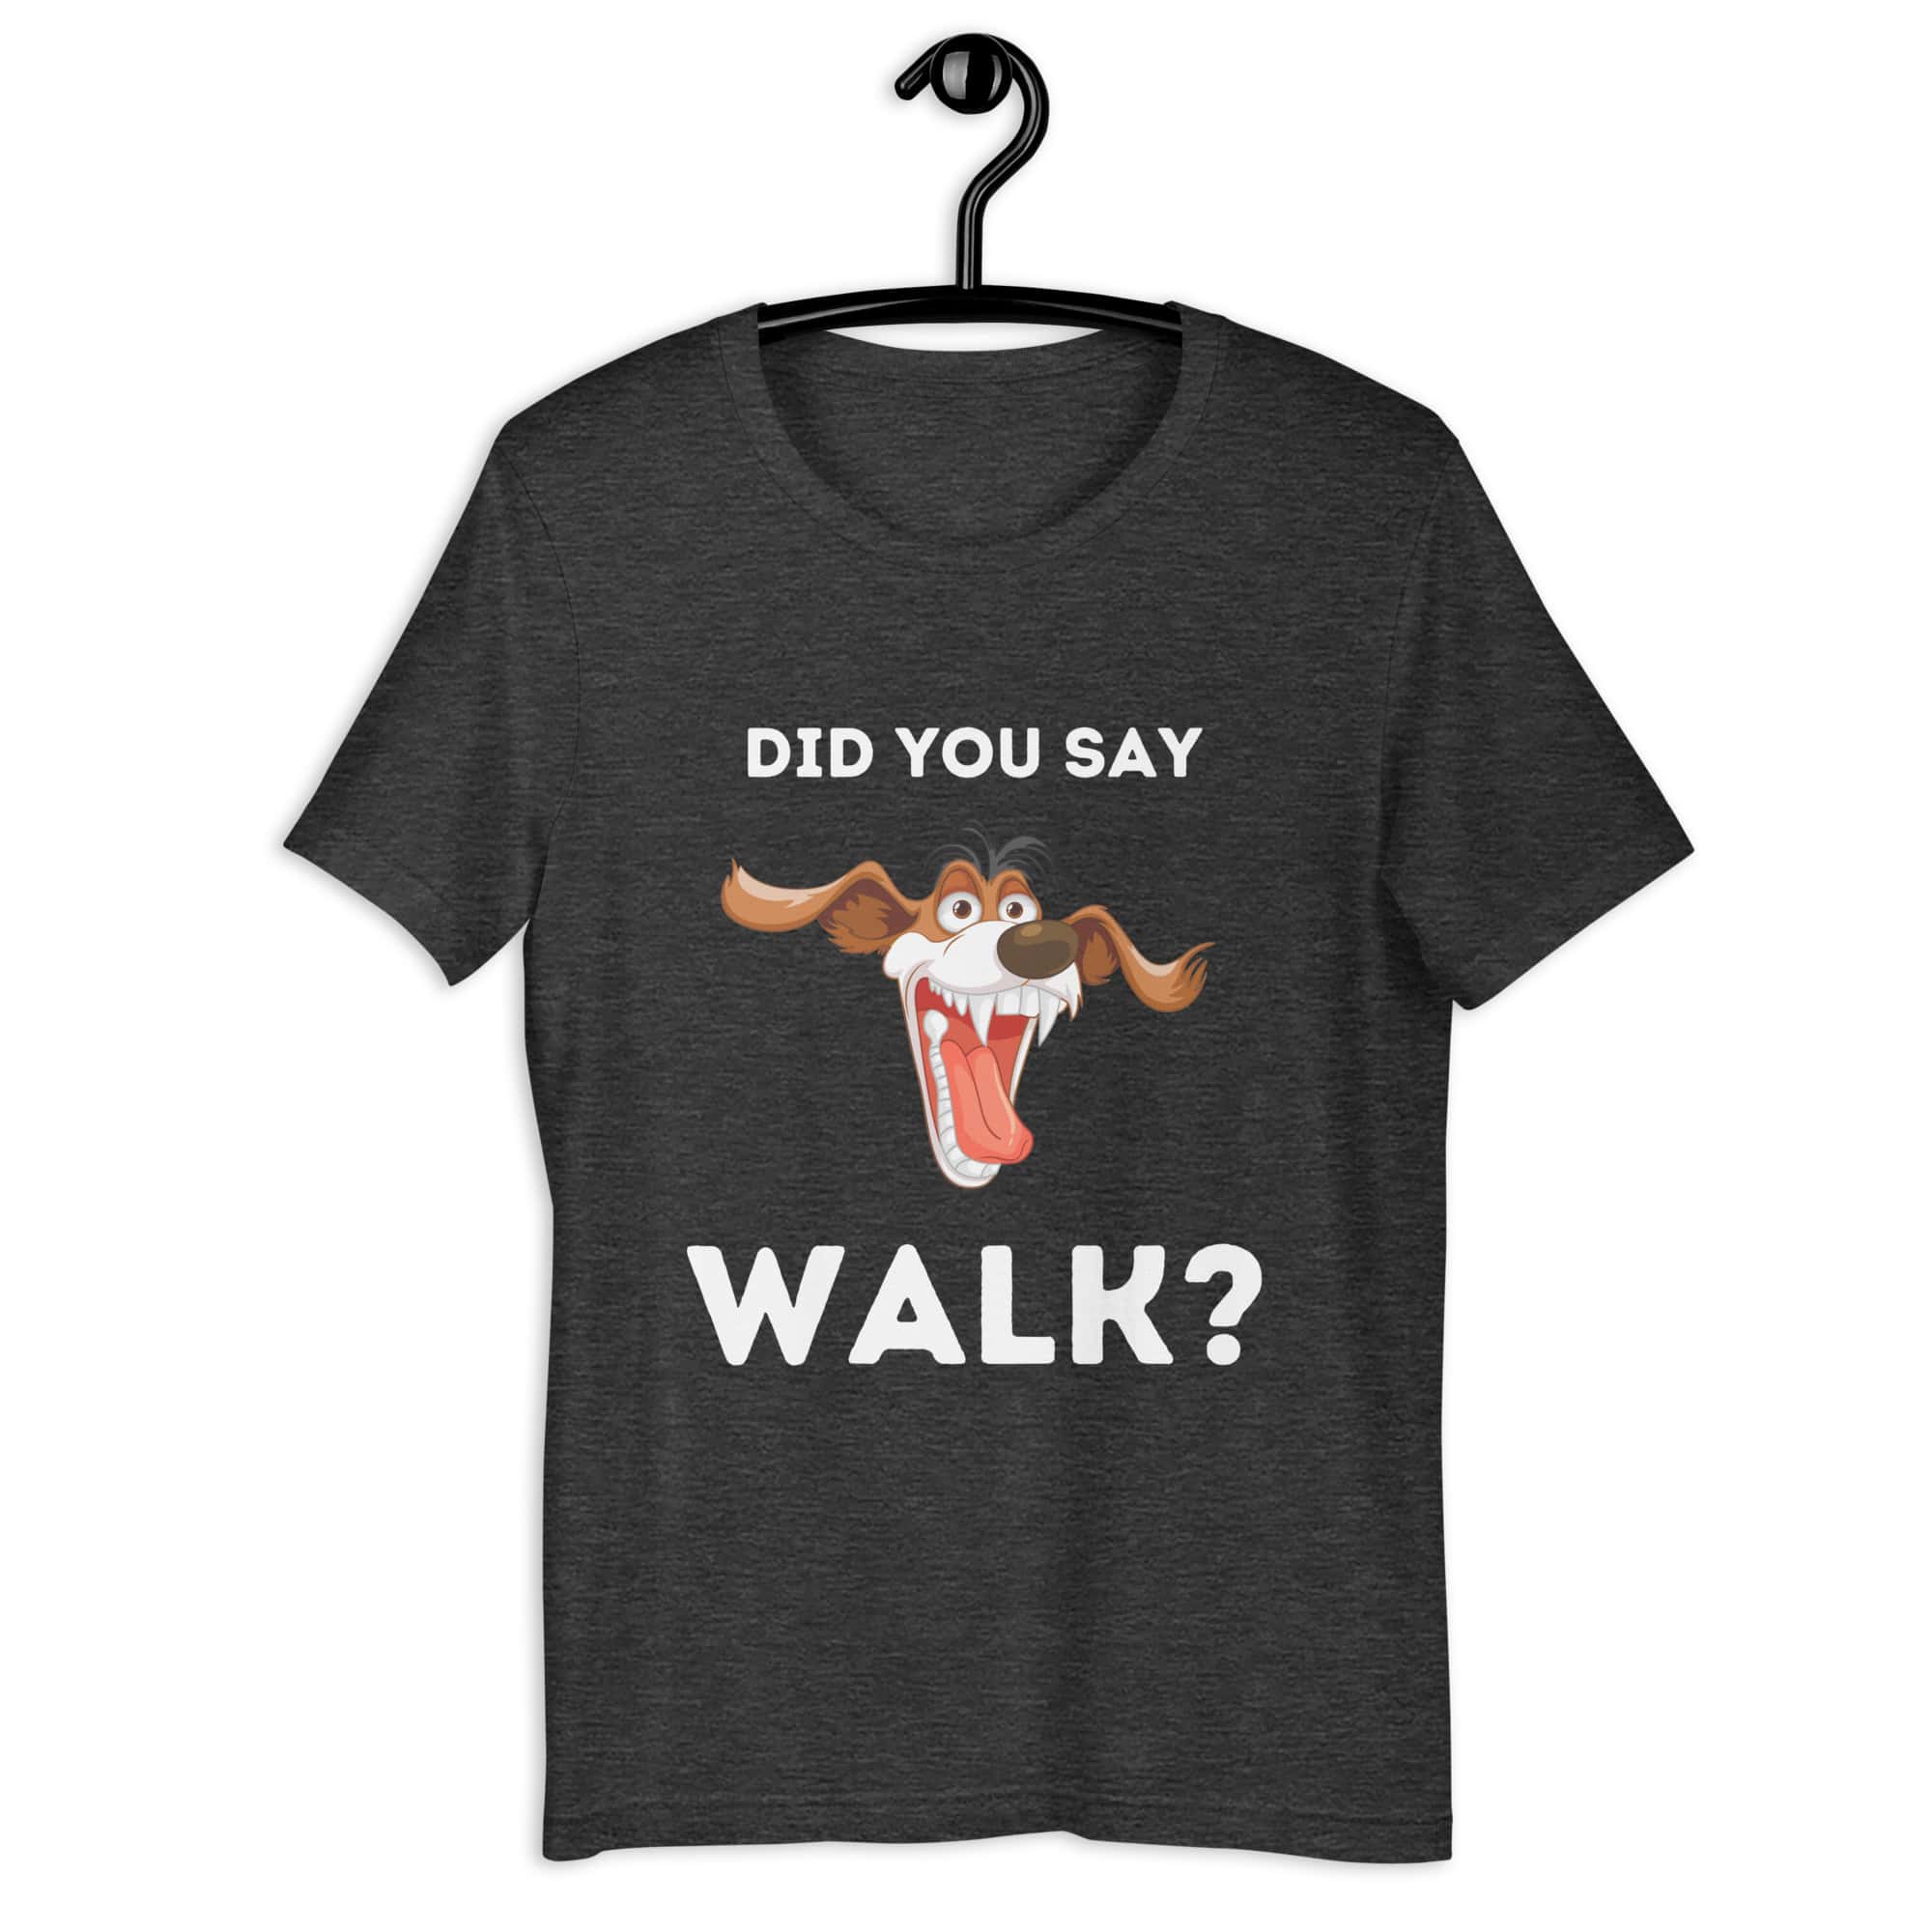 The "Funny 'Did You Say Walk?' Dog Unisex T-Shirt" captures the excitement dogs feel at the mention of a walk. Made from a comfortable, durable blend, it features a vibrant graphic that dog lovers will relate to. Available in various sizes and colors, it's perfect for casual wear, highlighting a universal moment in dog ownership with humor and style. Royal Dark Grey